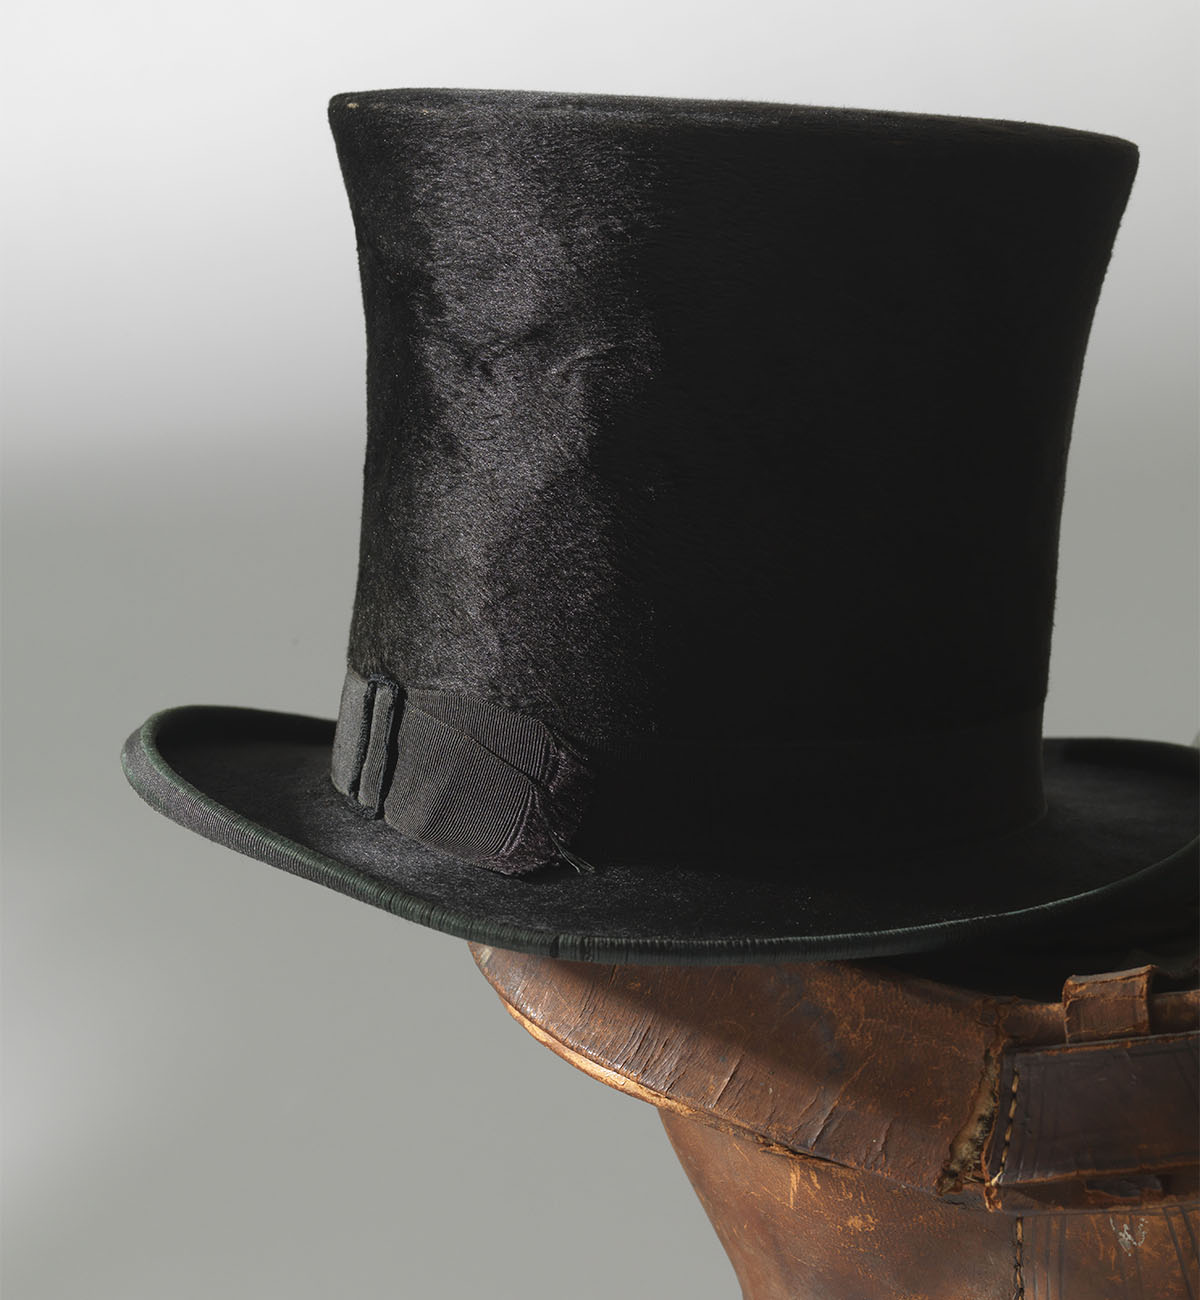 Beaver top hat and leather hat box